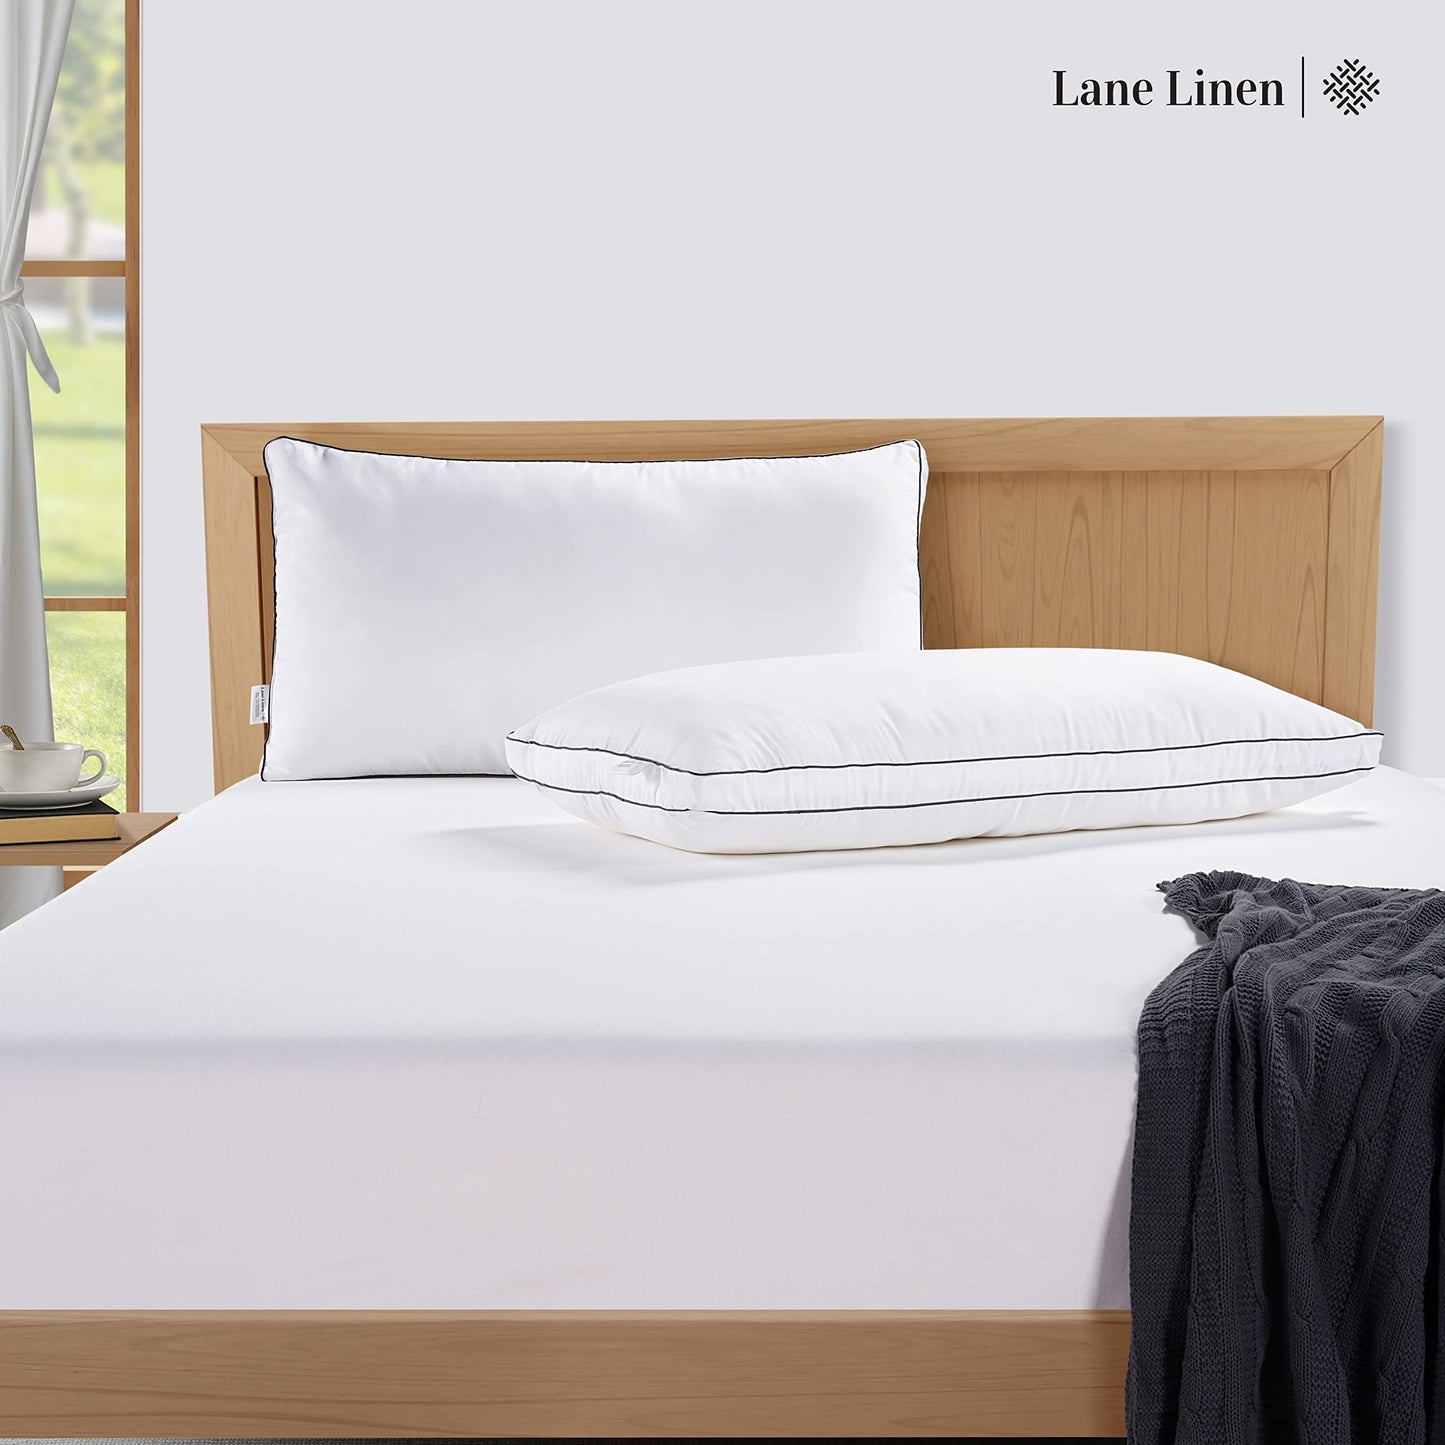 LANE LINEN Gusseted Soft Bed Pillows Standard Size Set of 2 for Sleeping, Back, Stomach or Side Sleepers, Down Alternative , White - 20 x 26 Inches